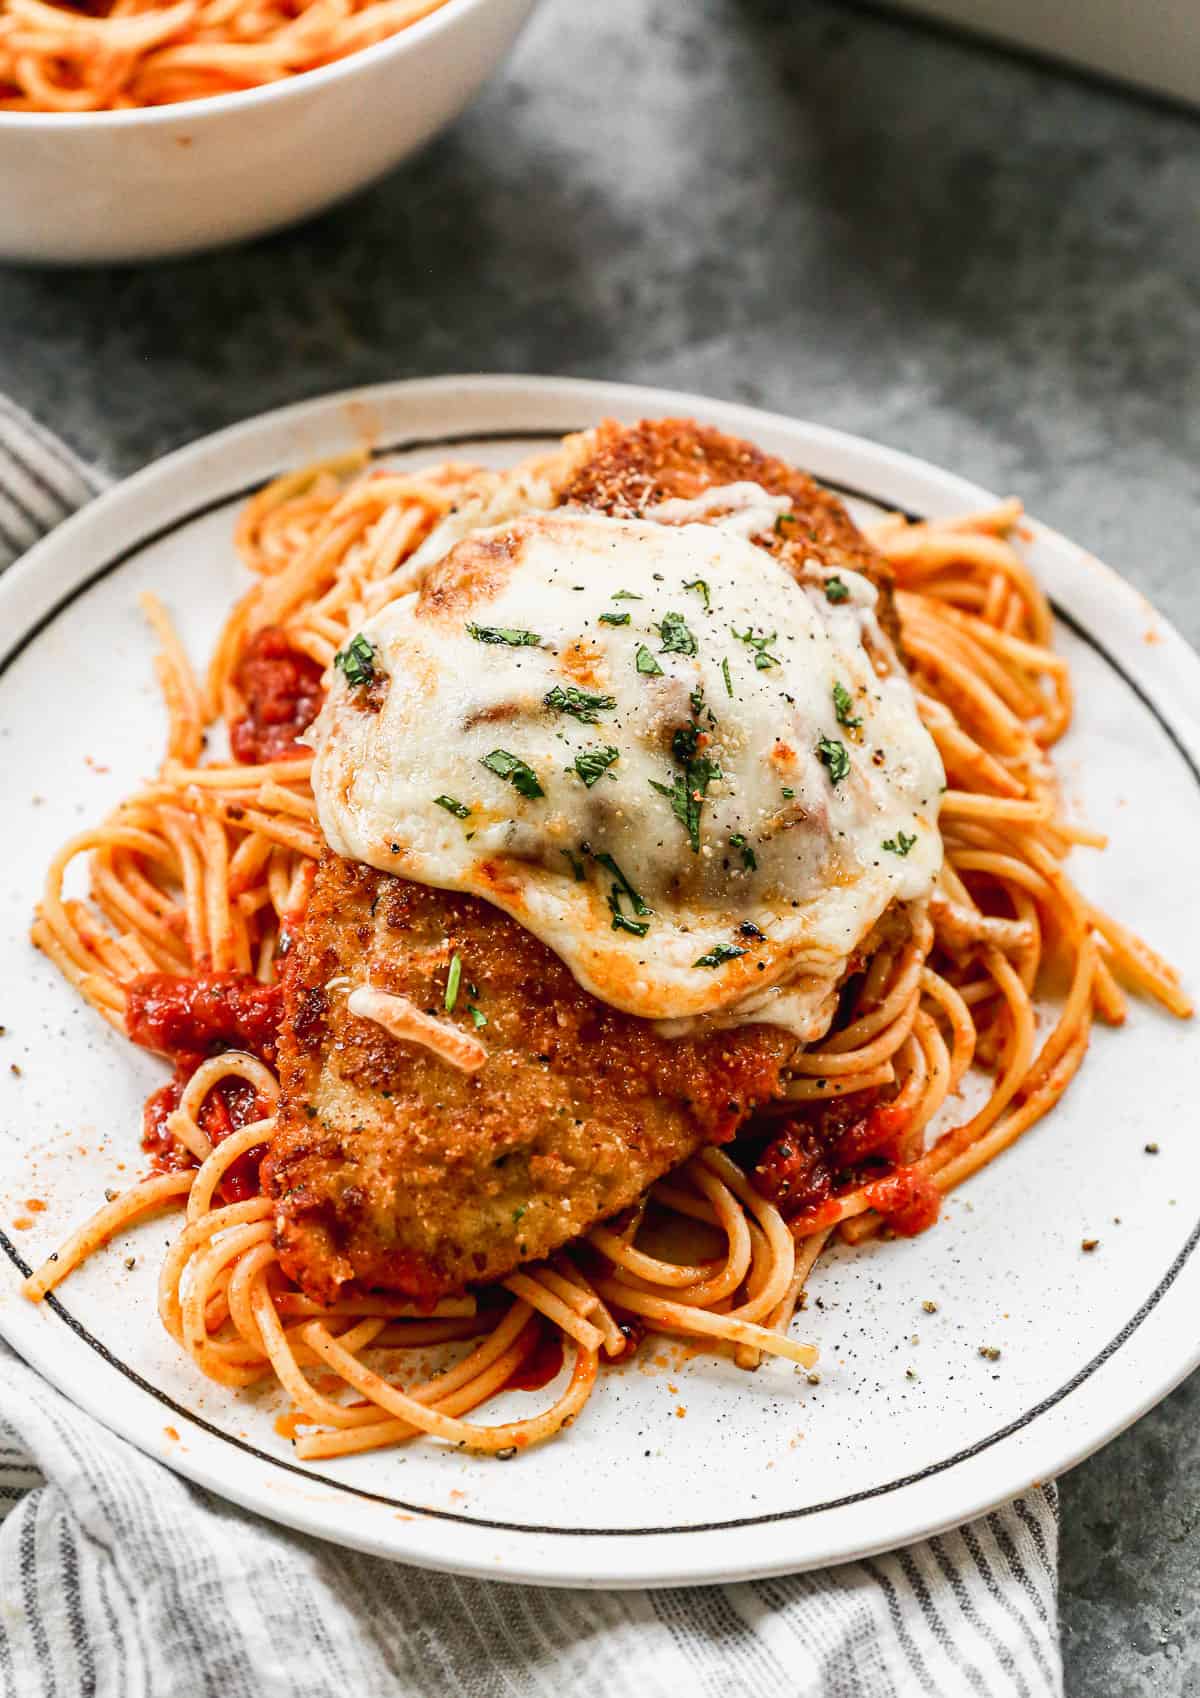 Chicken Parmesan with melted cheese, sitting on top of a pile of pasta.